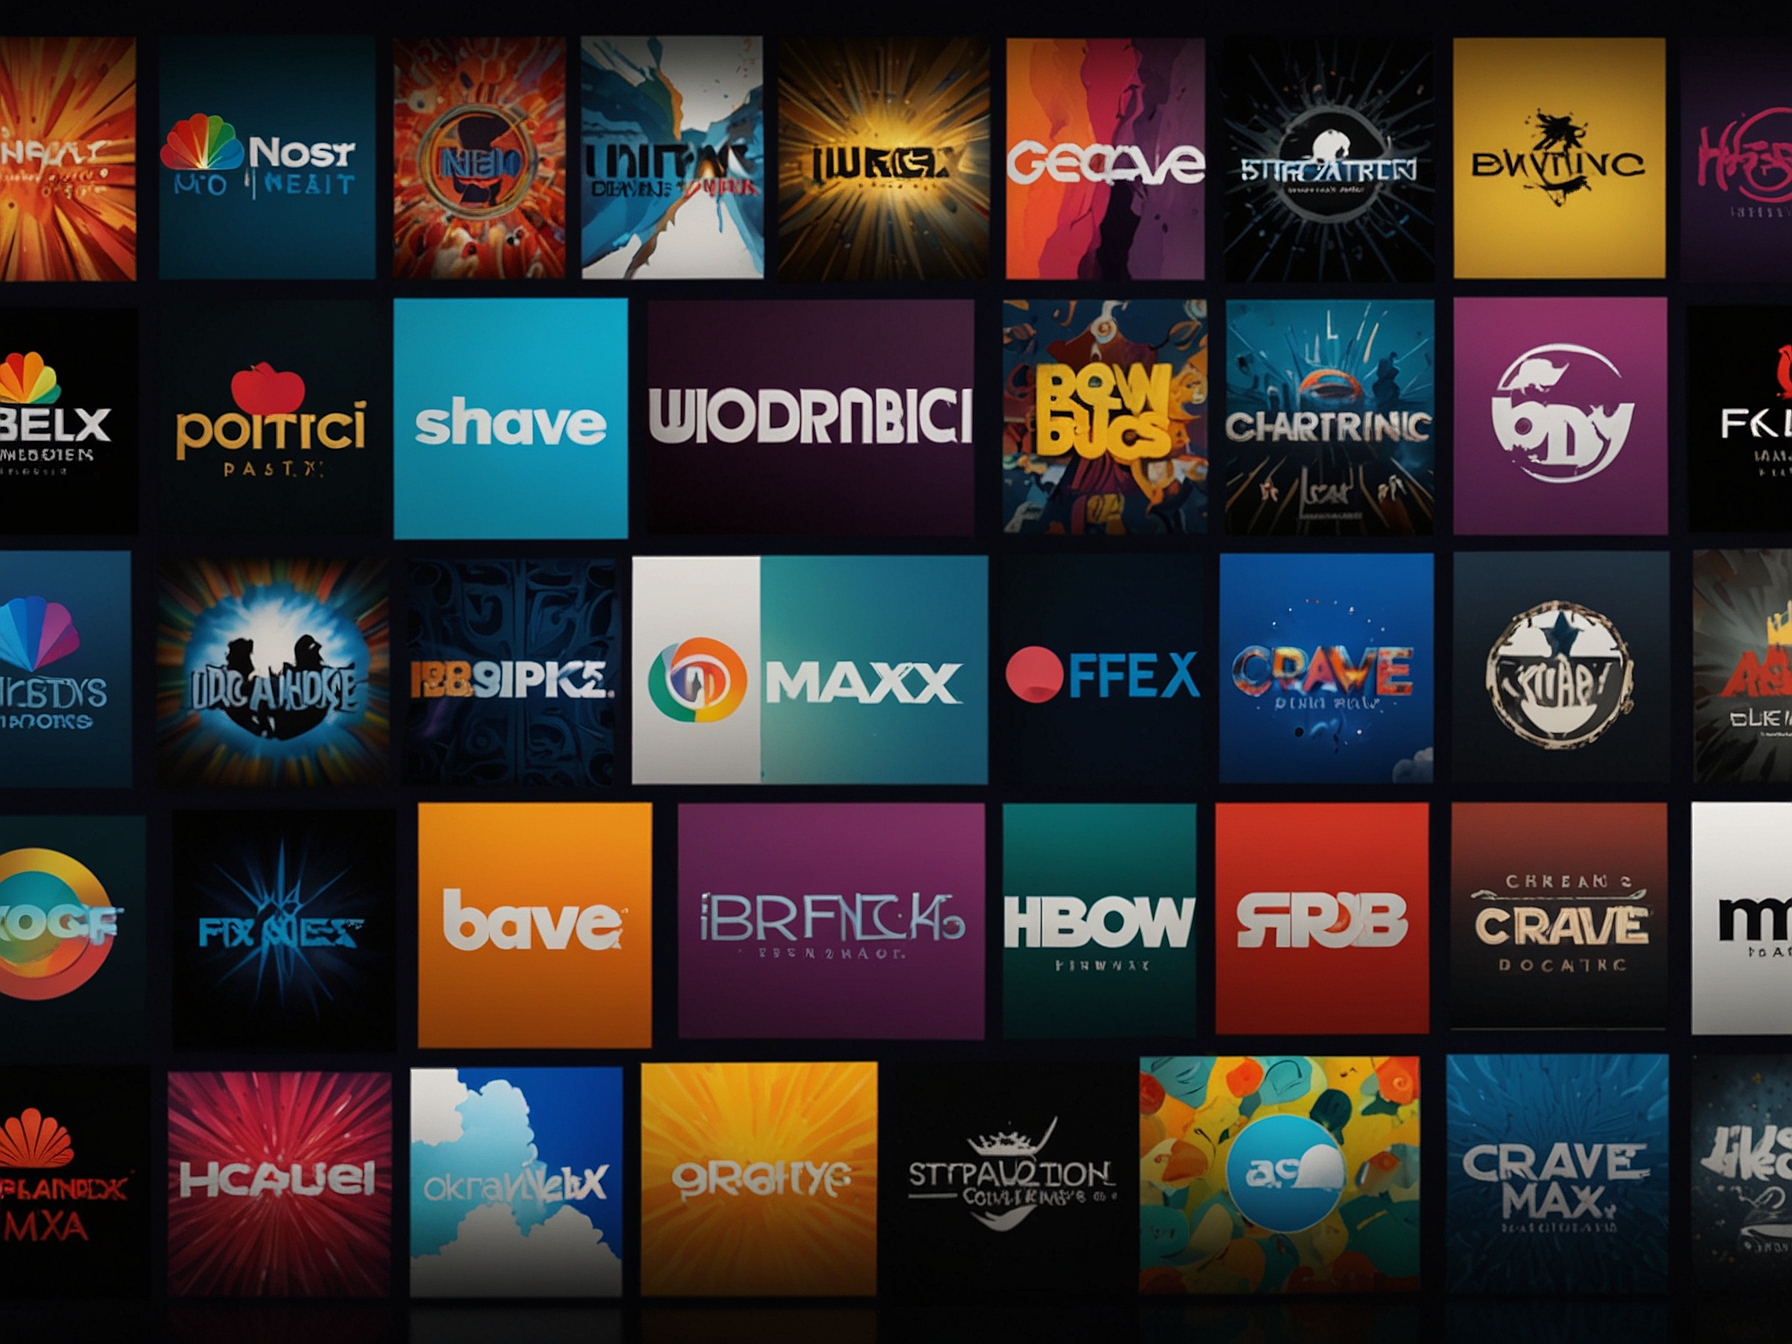 Different streaming service logos like HBO Max, Sky Atlantic, Crave, and Binge, visually representing the variety of options available for international fans to watch the show.